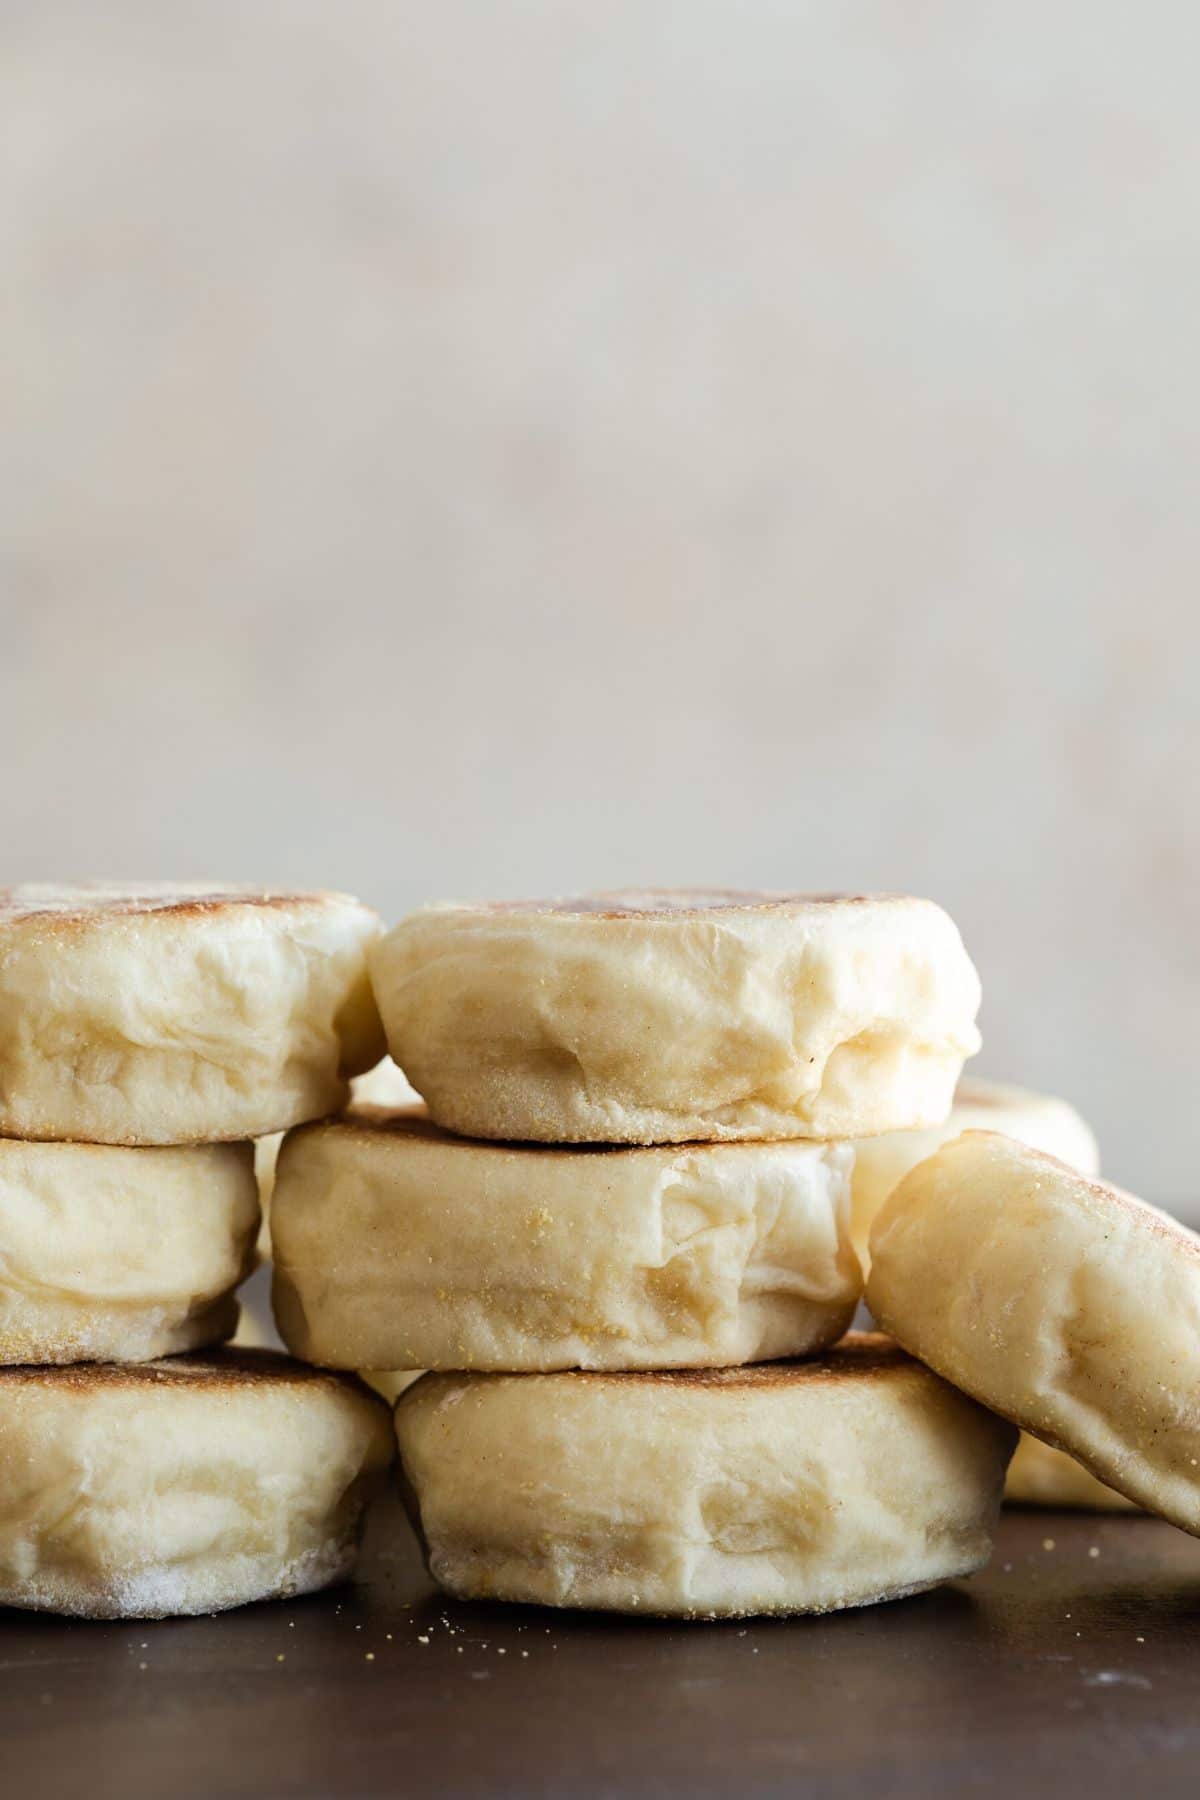 English muffins stacked on brown background